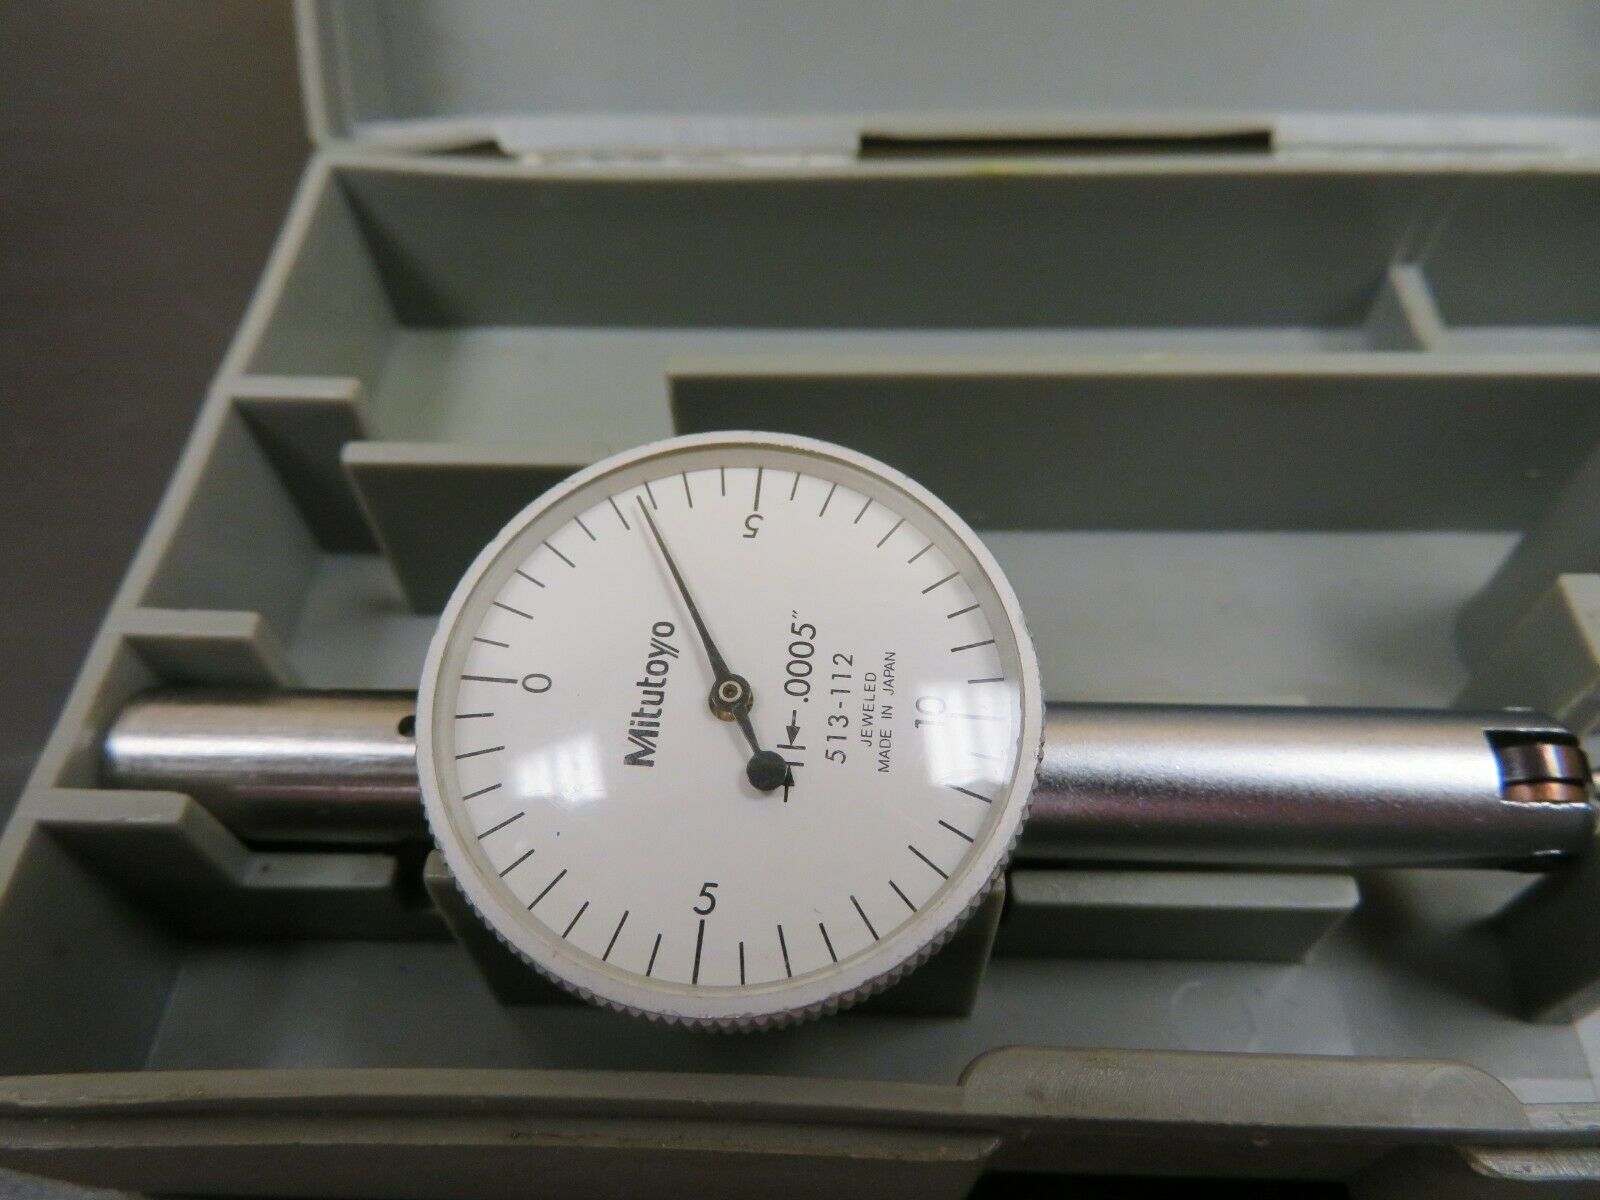 Mitutoyo Dial Test Indicator 513-302 .0005 Grads Stk 7513 for sale online 